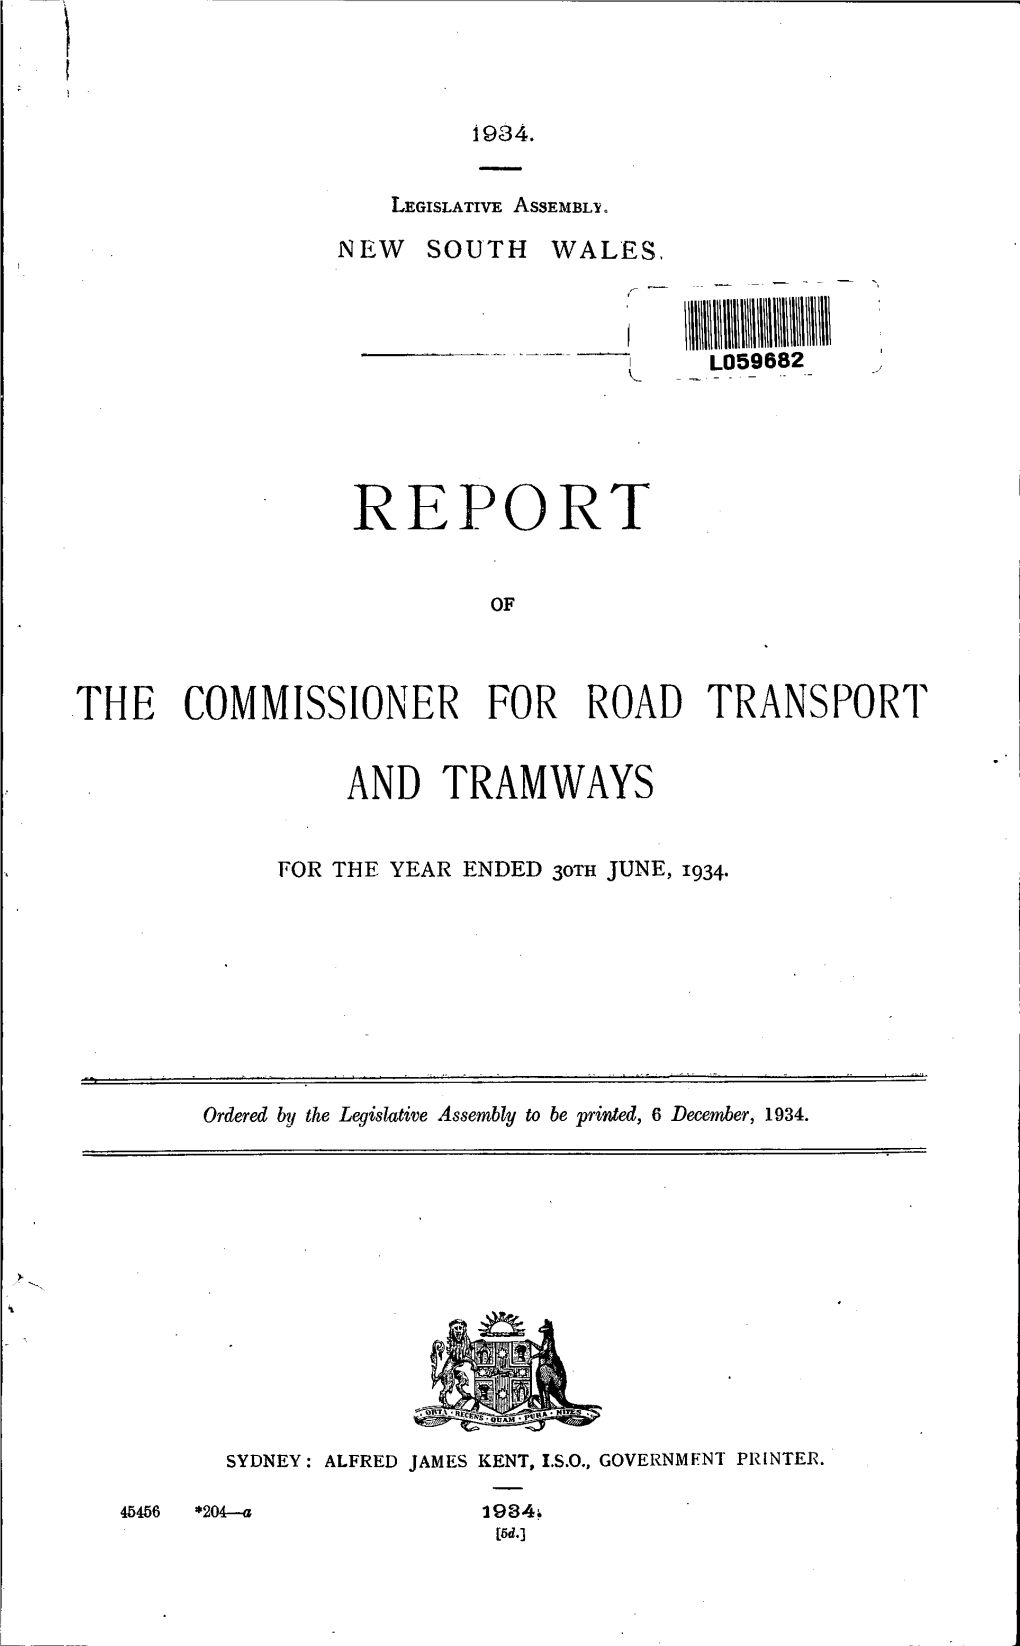 Road Transport and Tramway, 1933-34